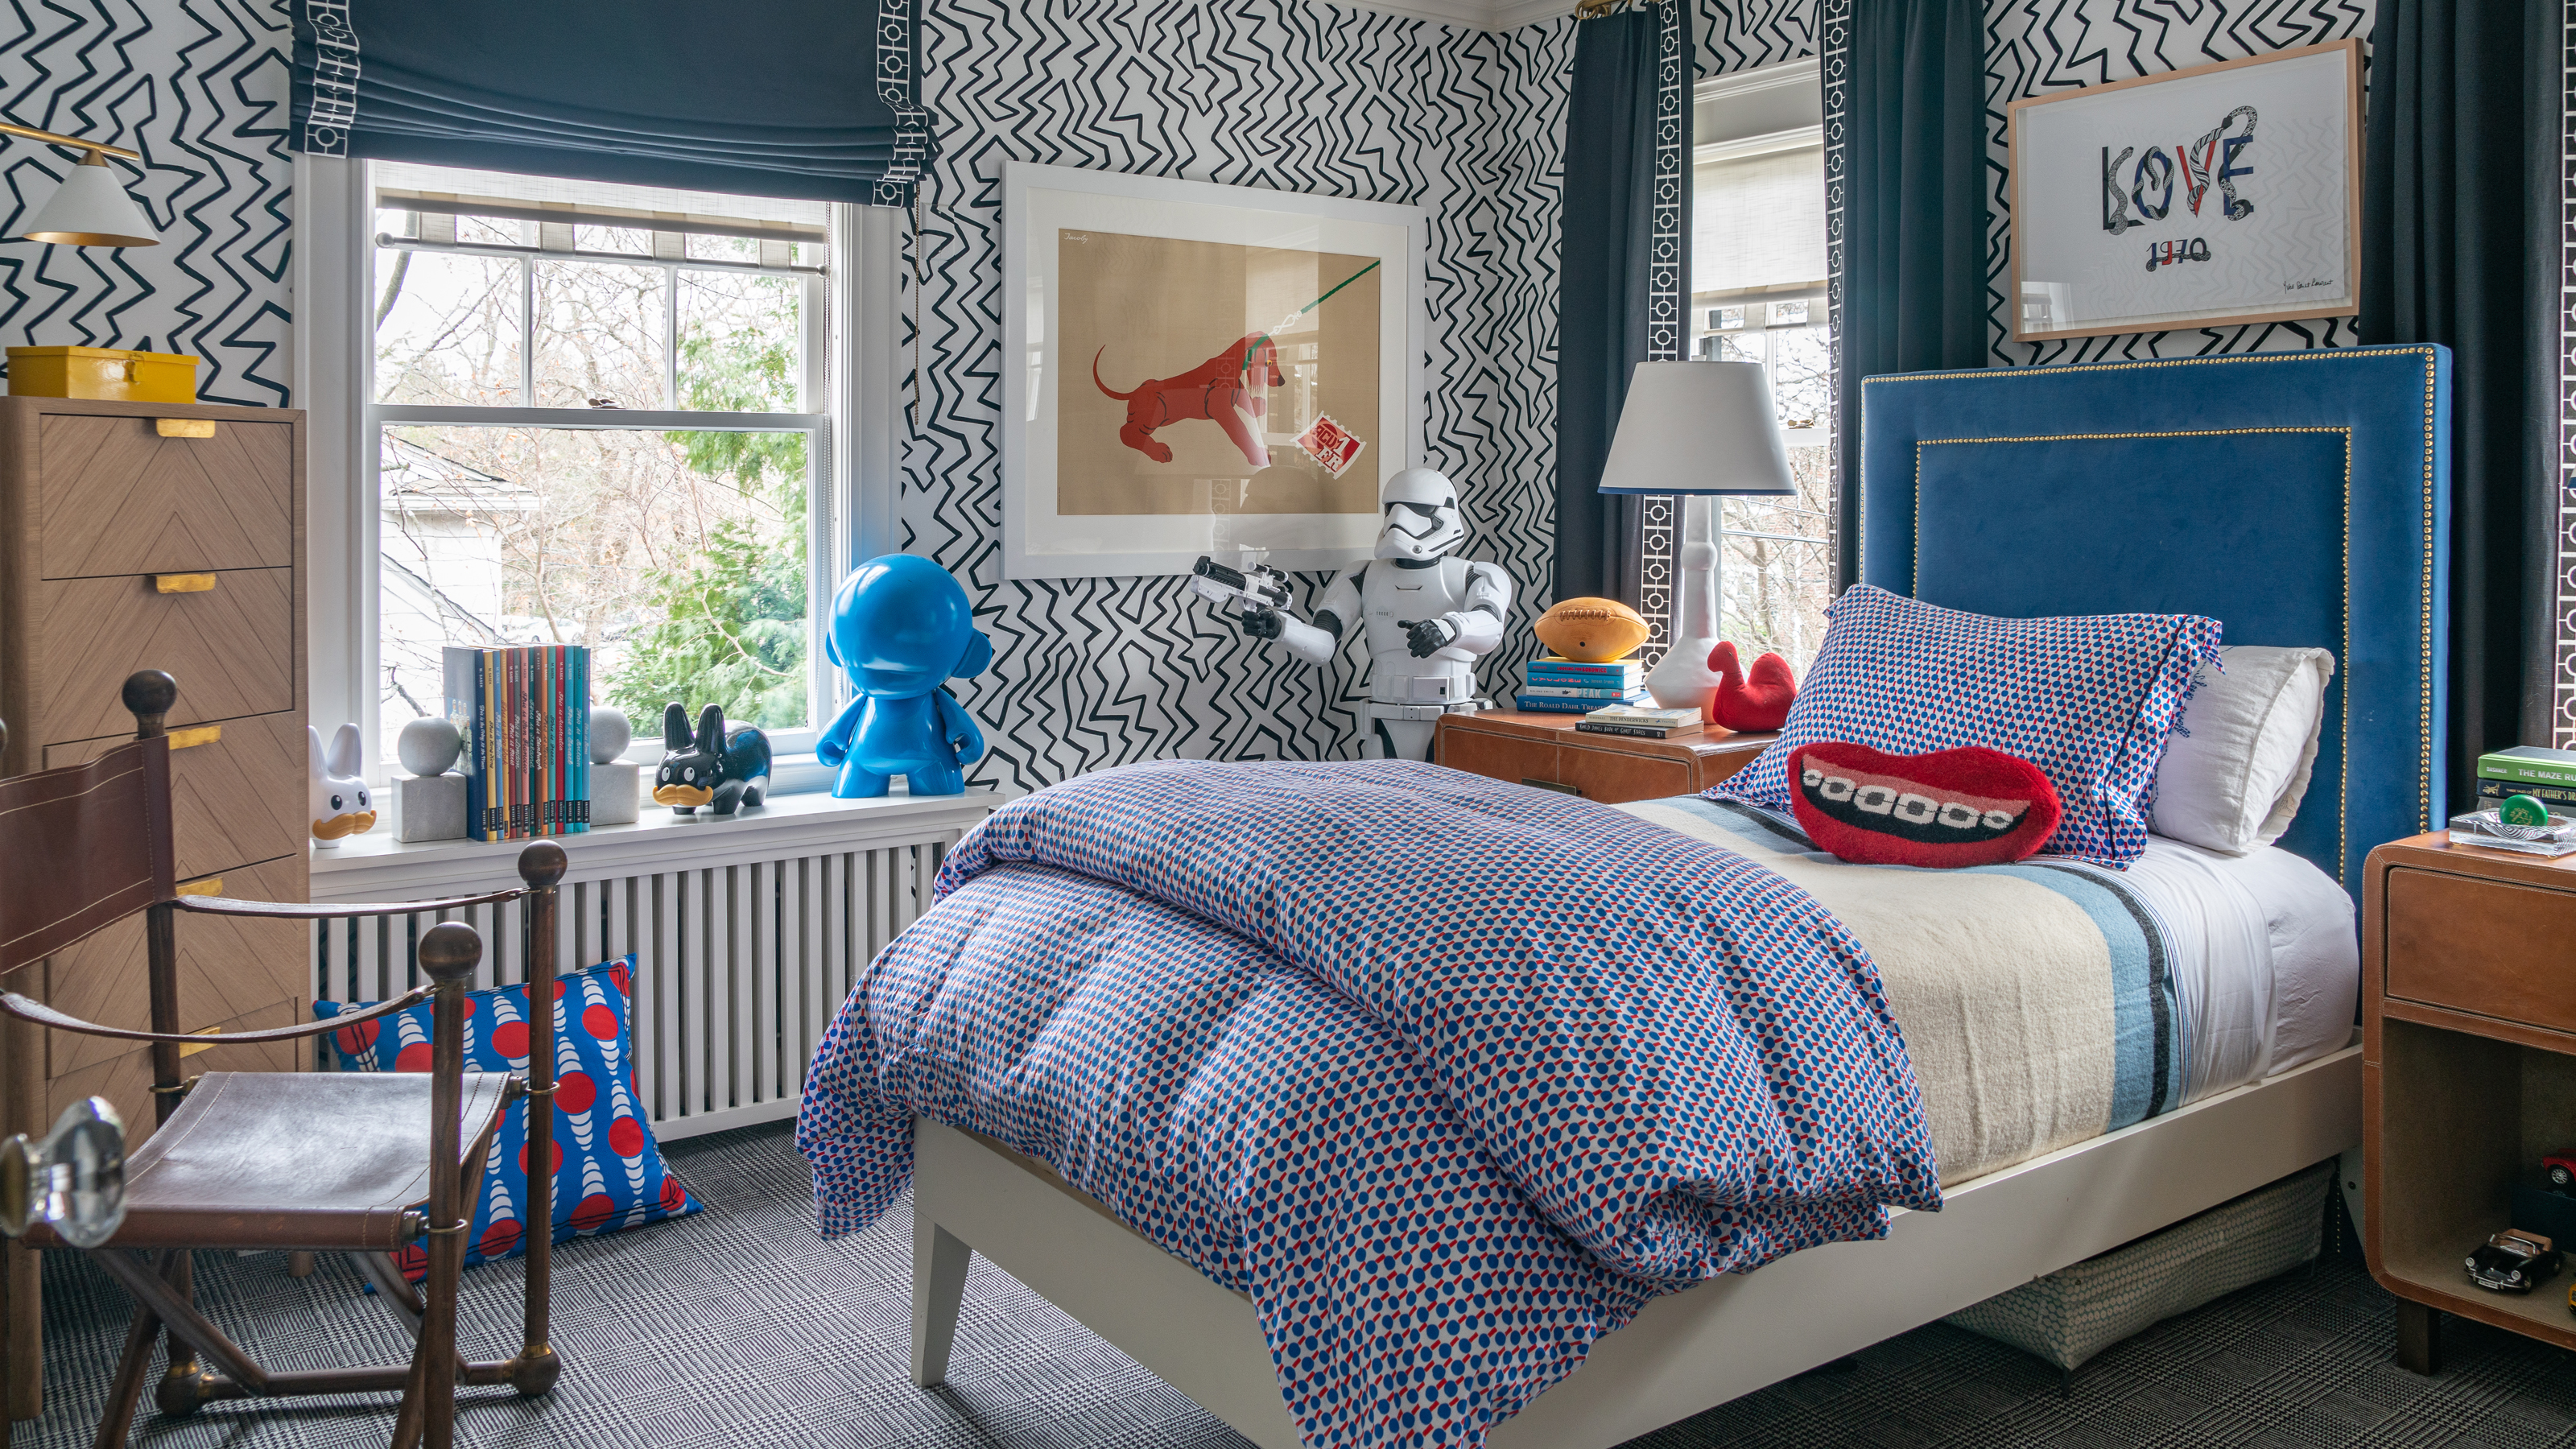 Teenage boys' bedroom ideas: 18 tips for seriously cool rooms |